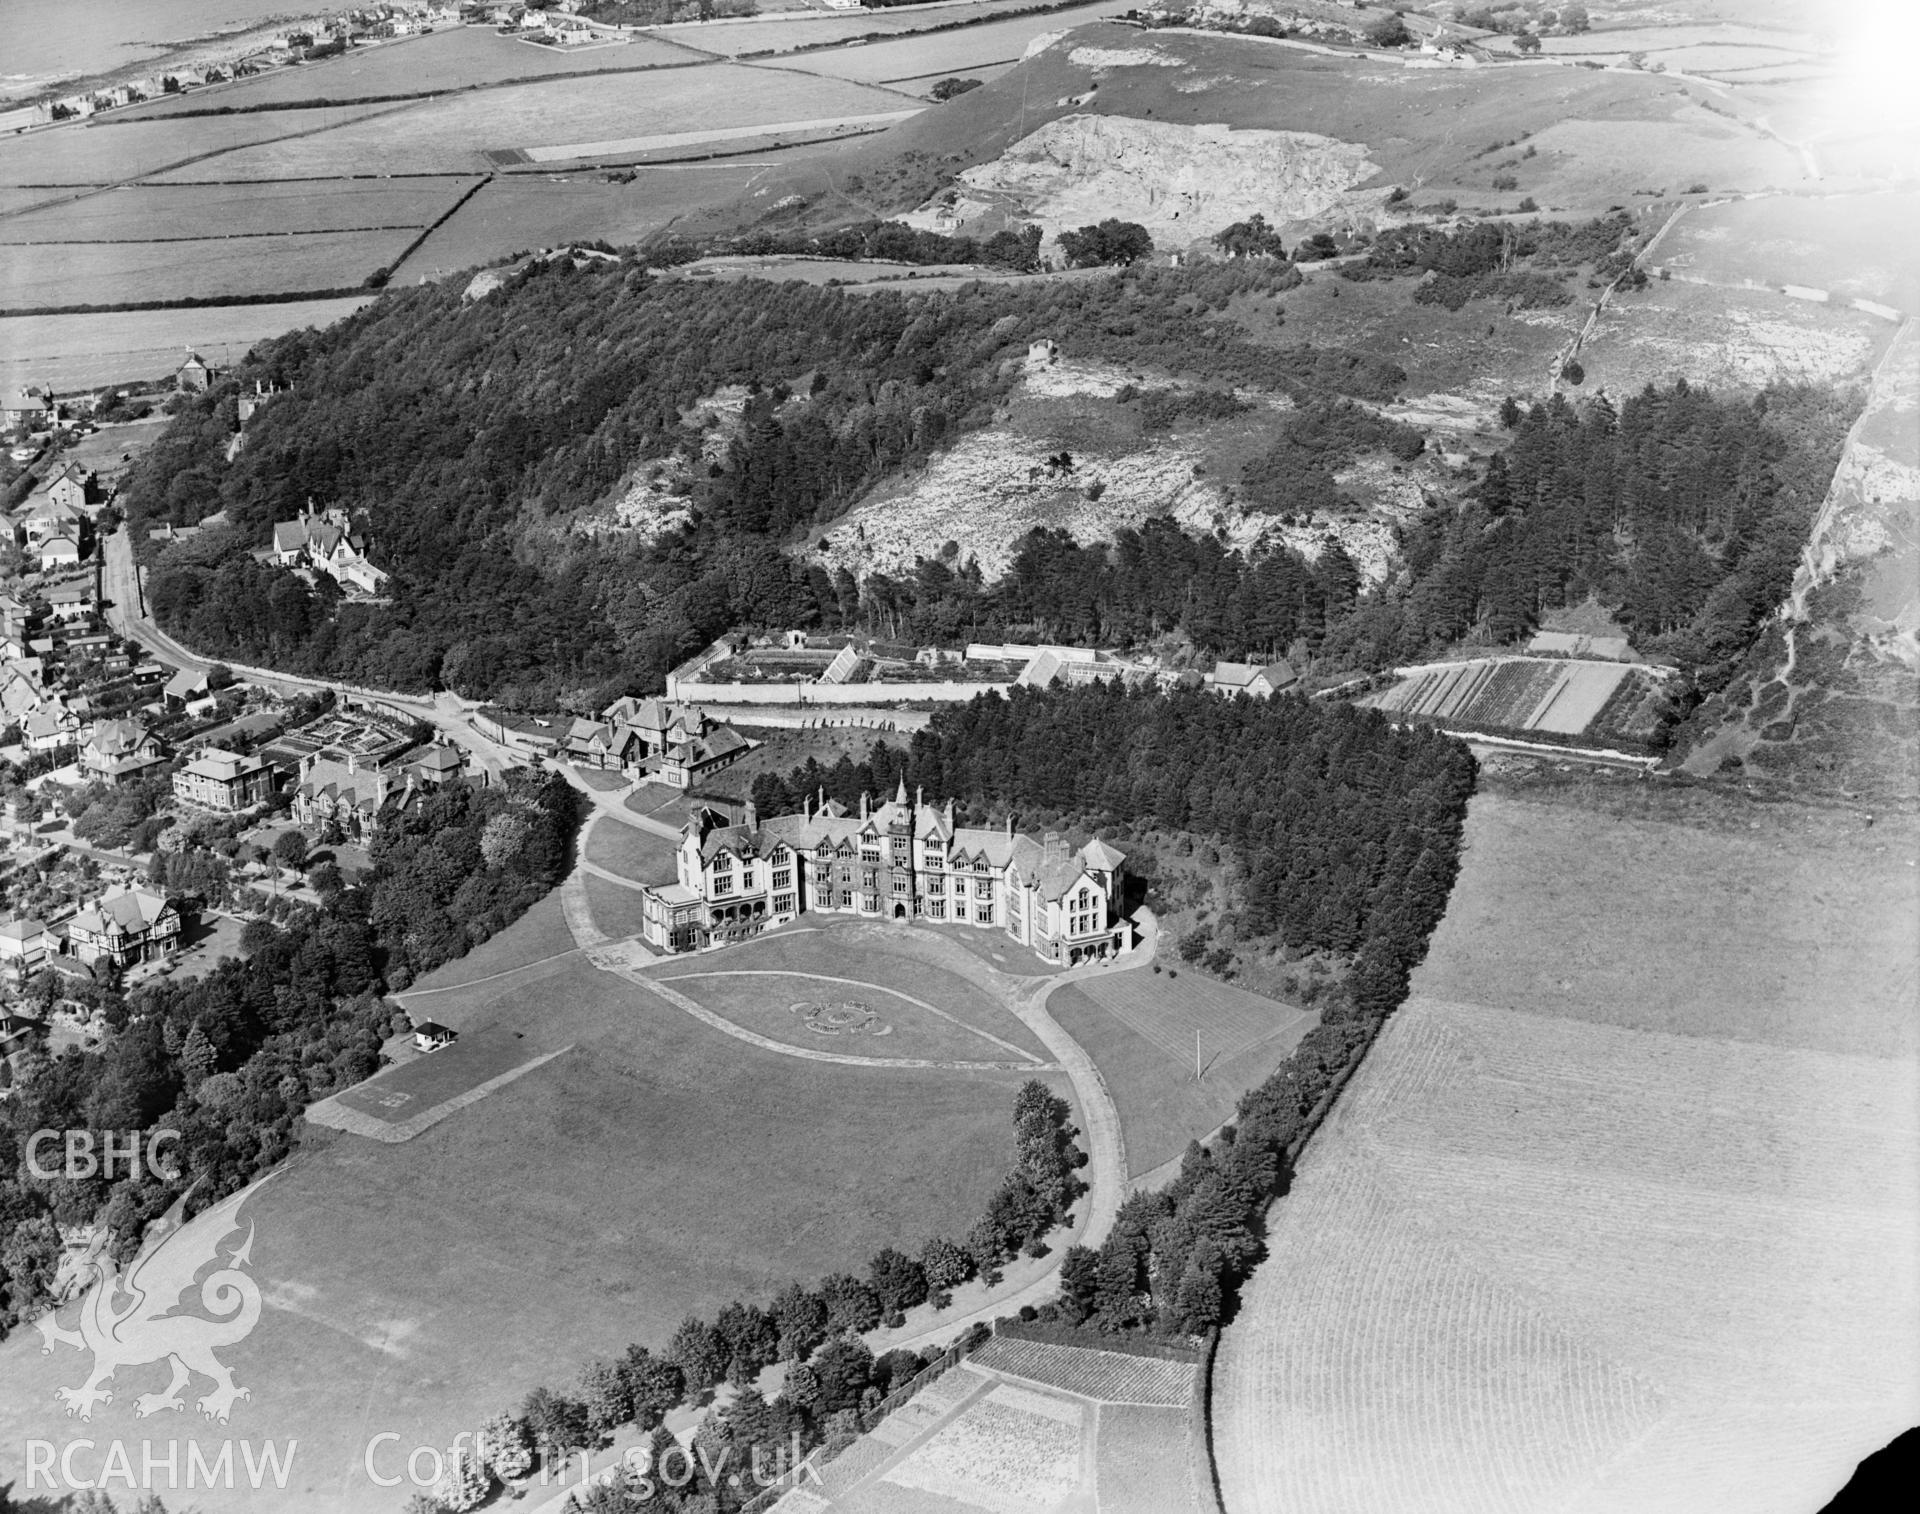 View of Lady Forester Convalescent Home and gardens, Llandudno, oblique aerial view. 5?x4? black and white glass plate negative.